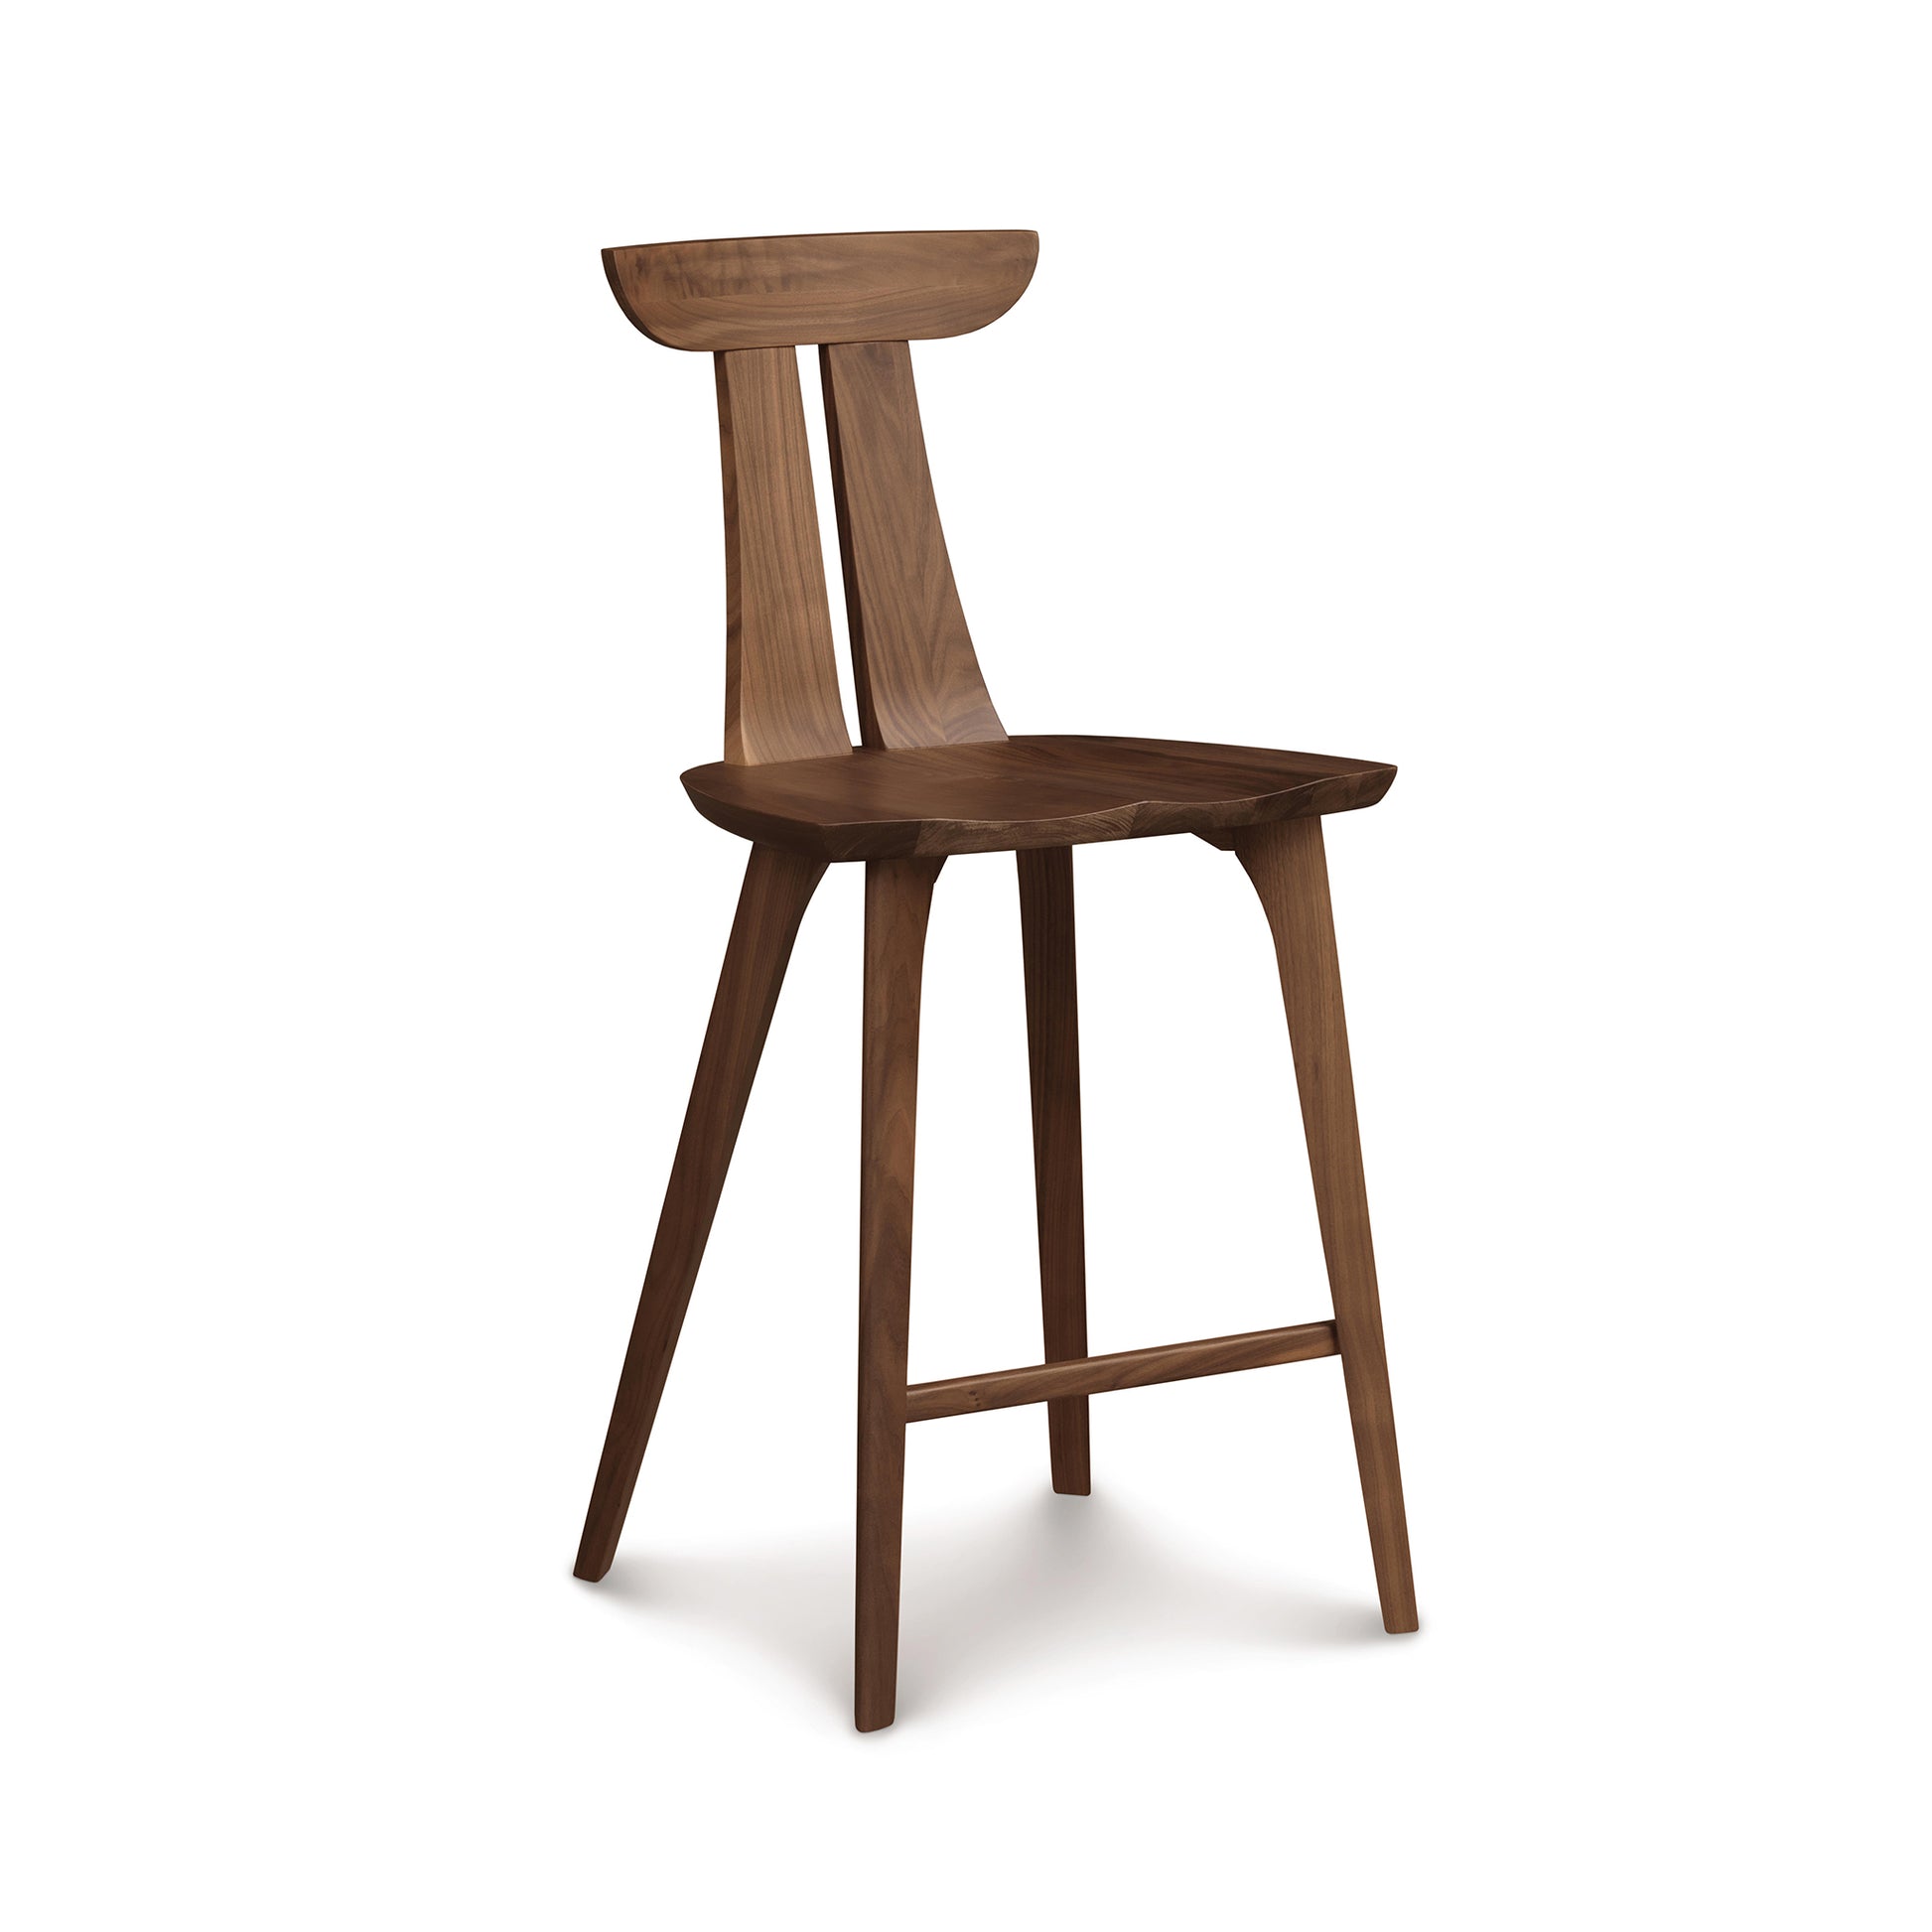 A Copeland Furniture Estelle Counter Stool with a curved backrest, isolated on a white background.